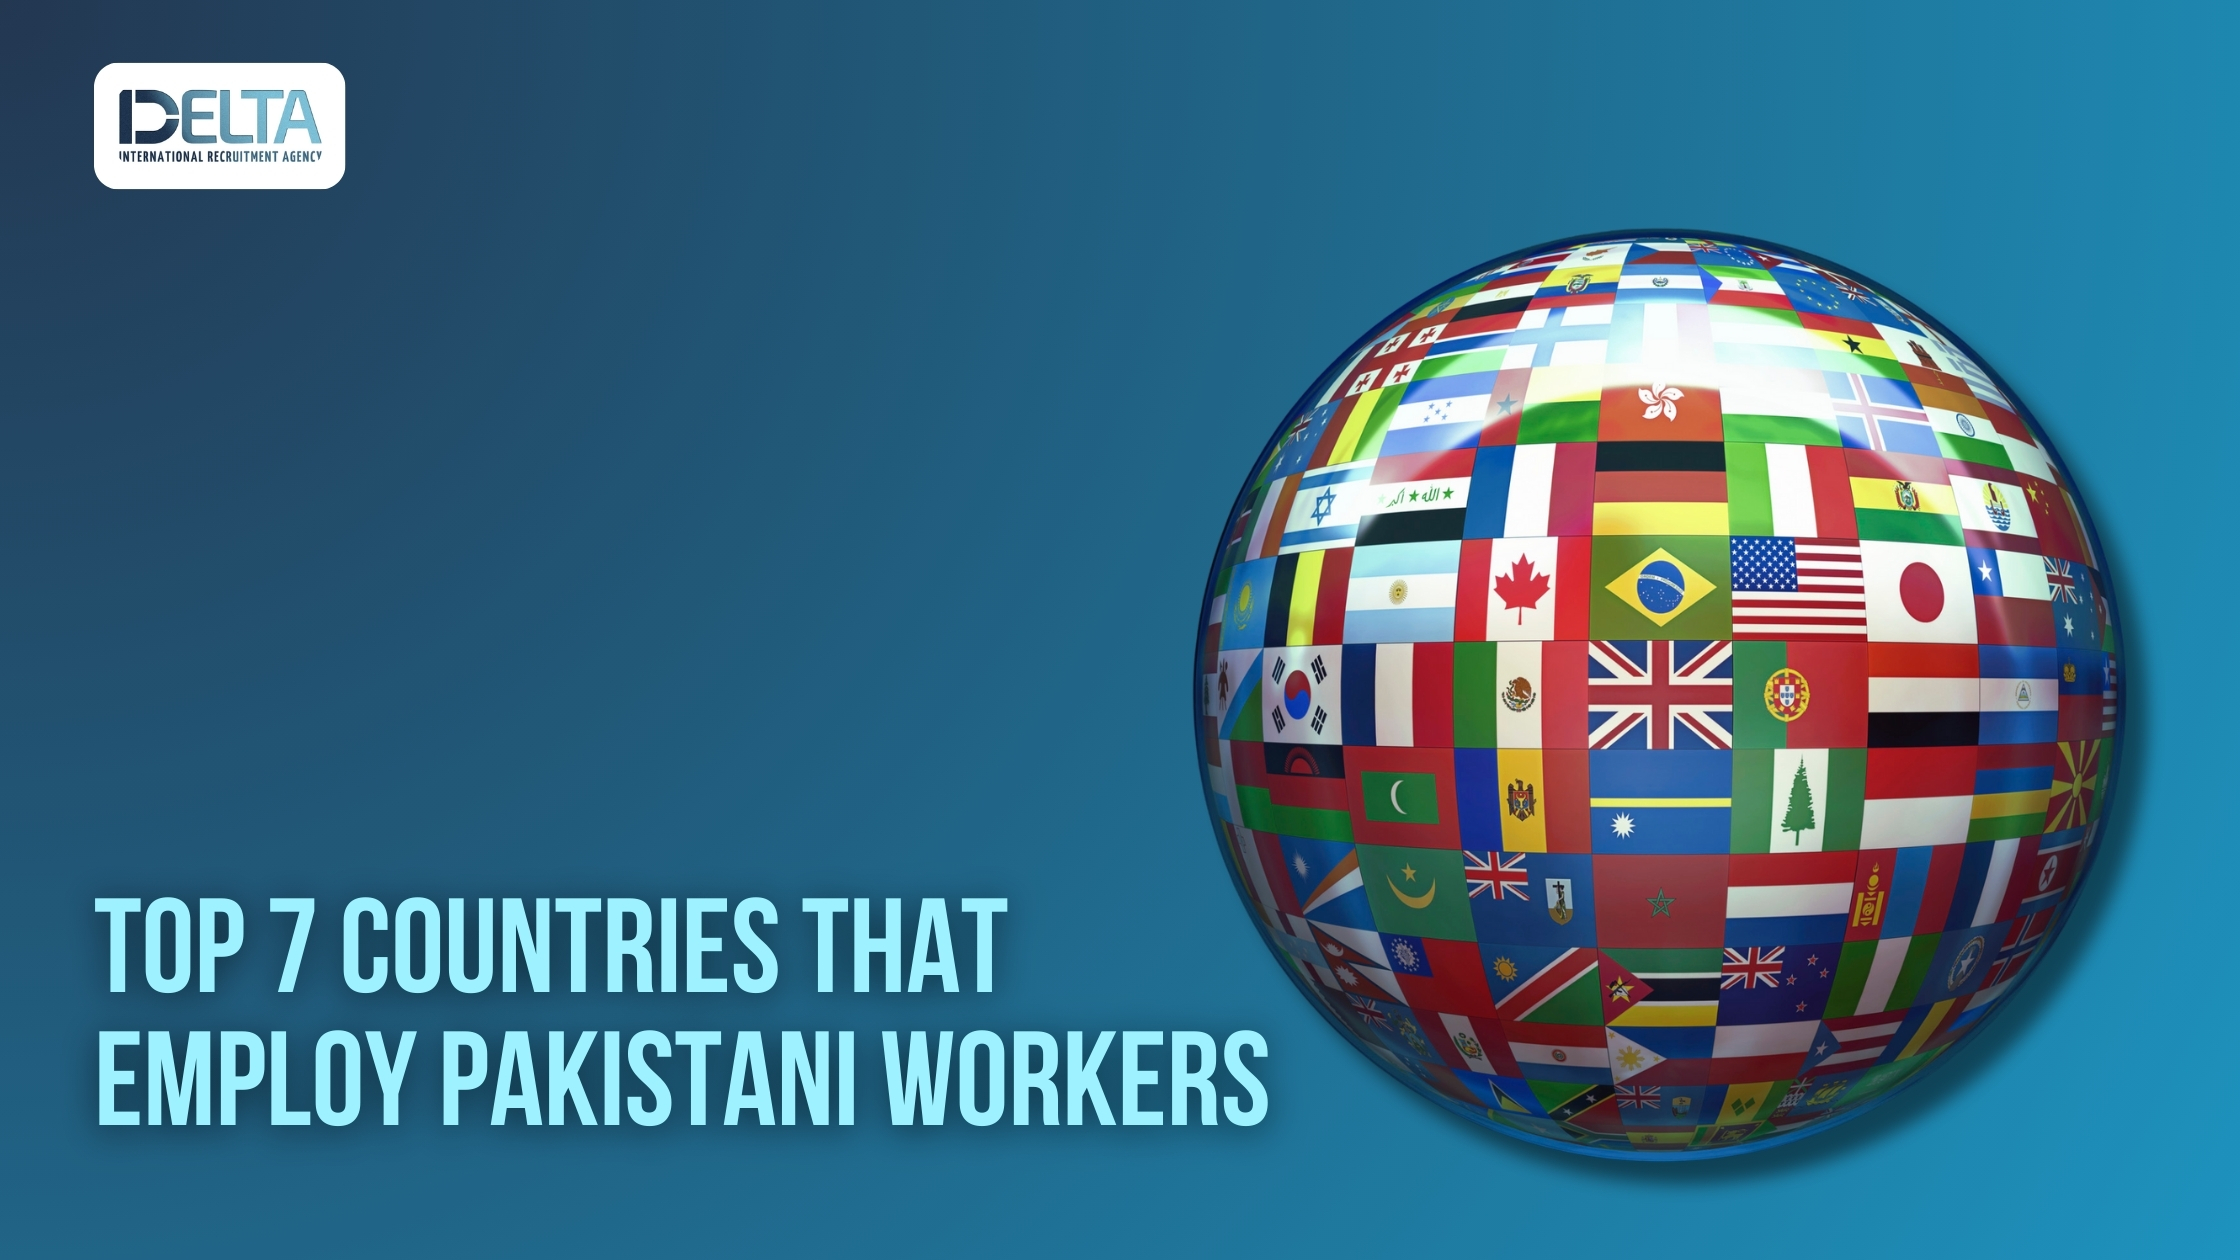 Top 7 Countries that Employ Pakistani Workers